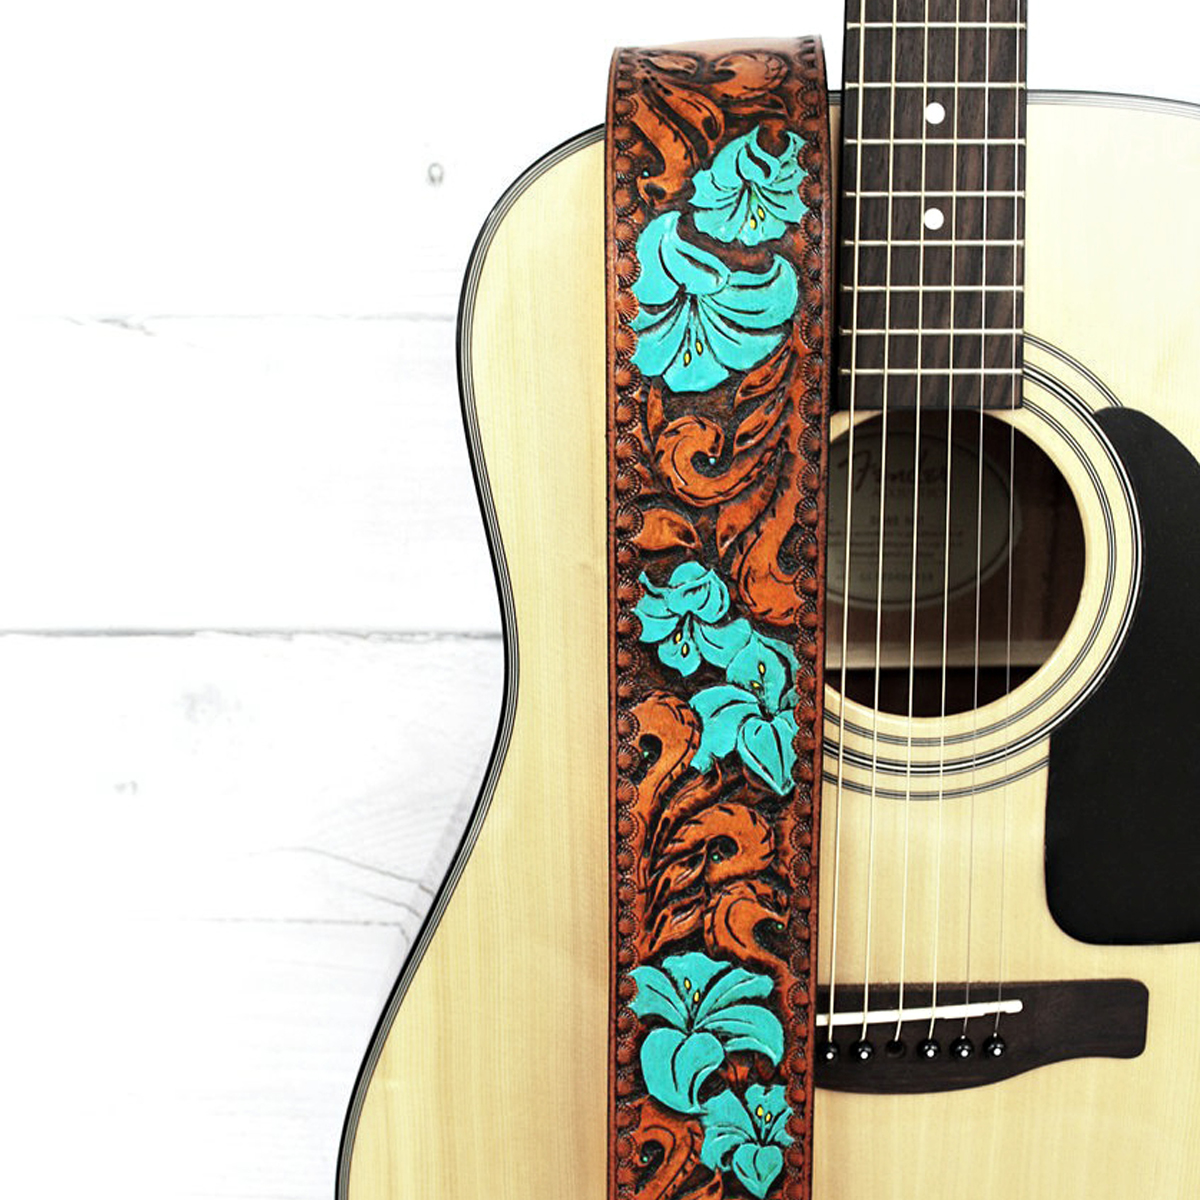 https://theleathersmithy.com/wp-content/uploads/2018/06/womens-floral-guitar-strap-lily-flowers-the-leather-smithy_1.jpg